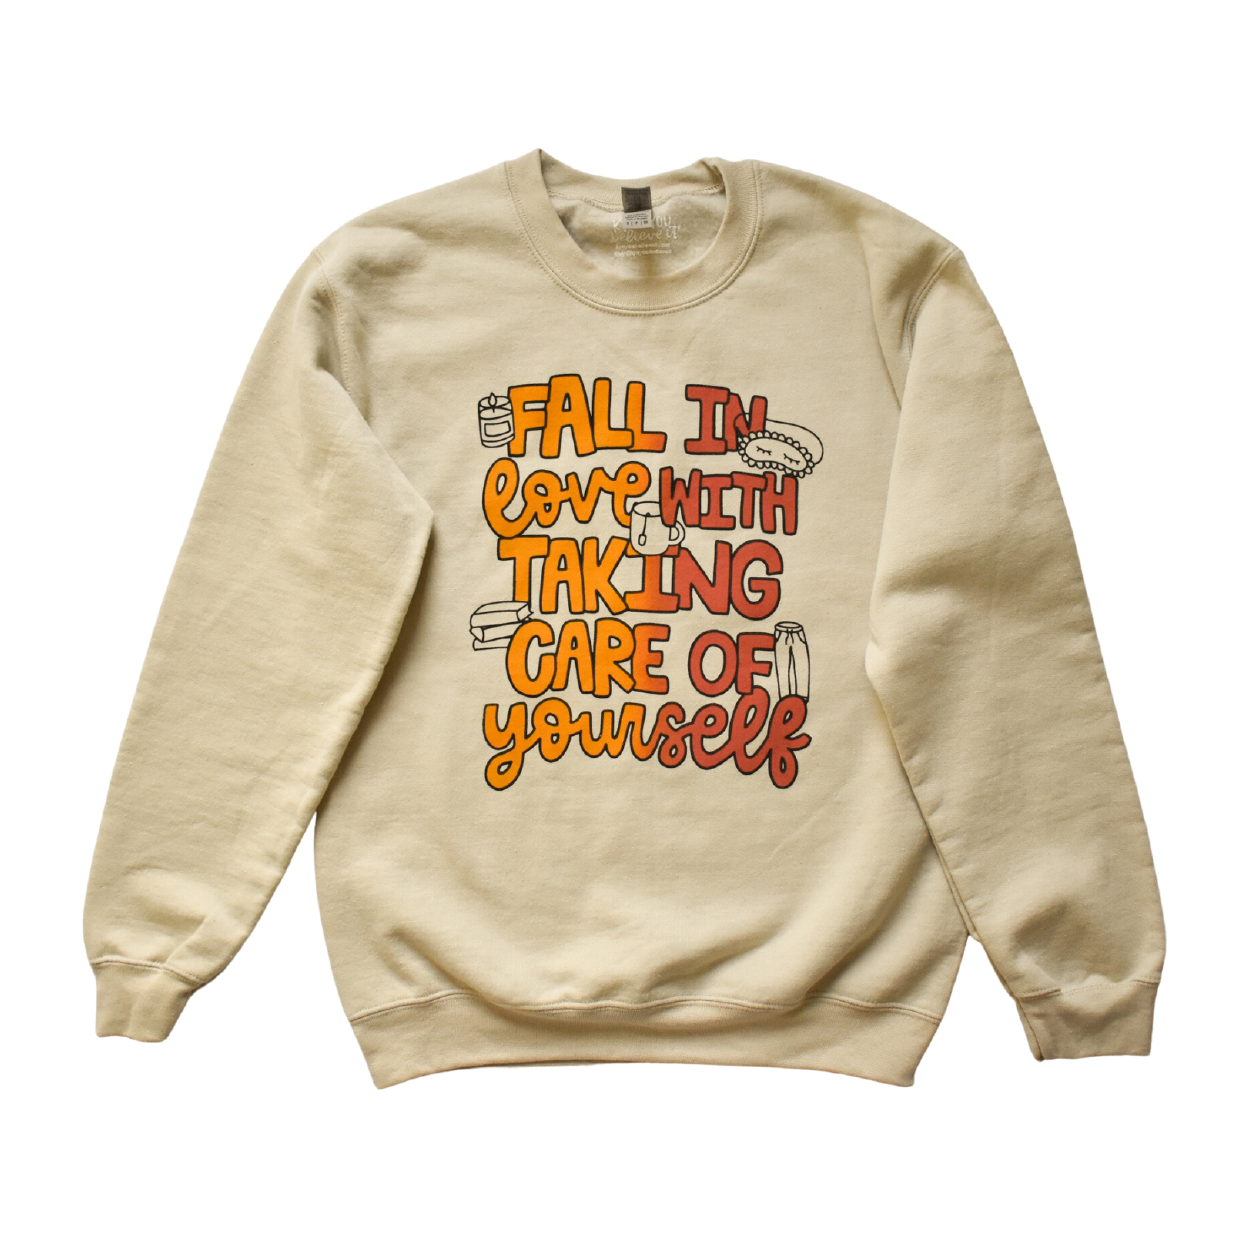 Fall In Love With Taking Care of Yourself Sweatshirt